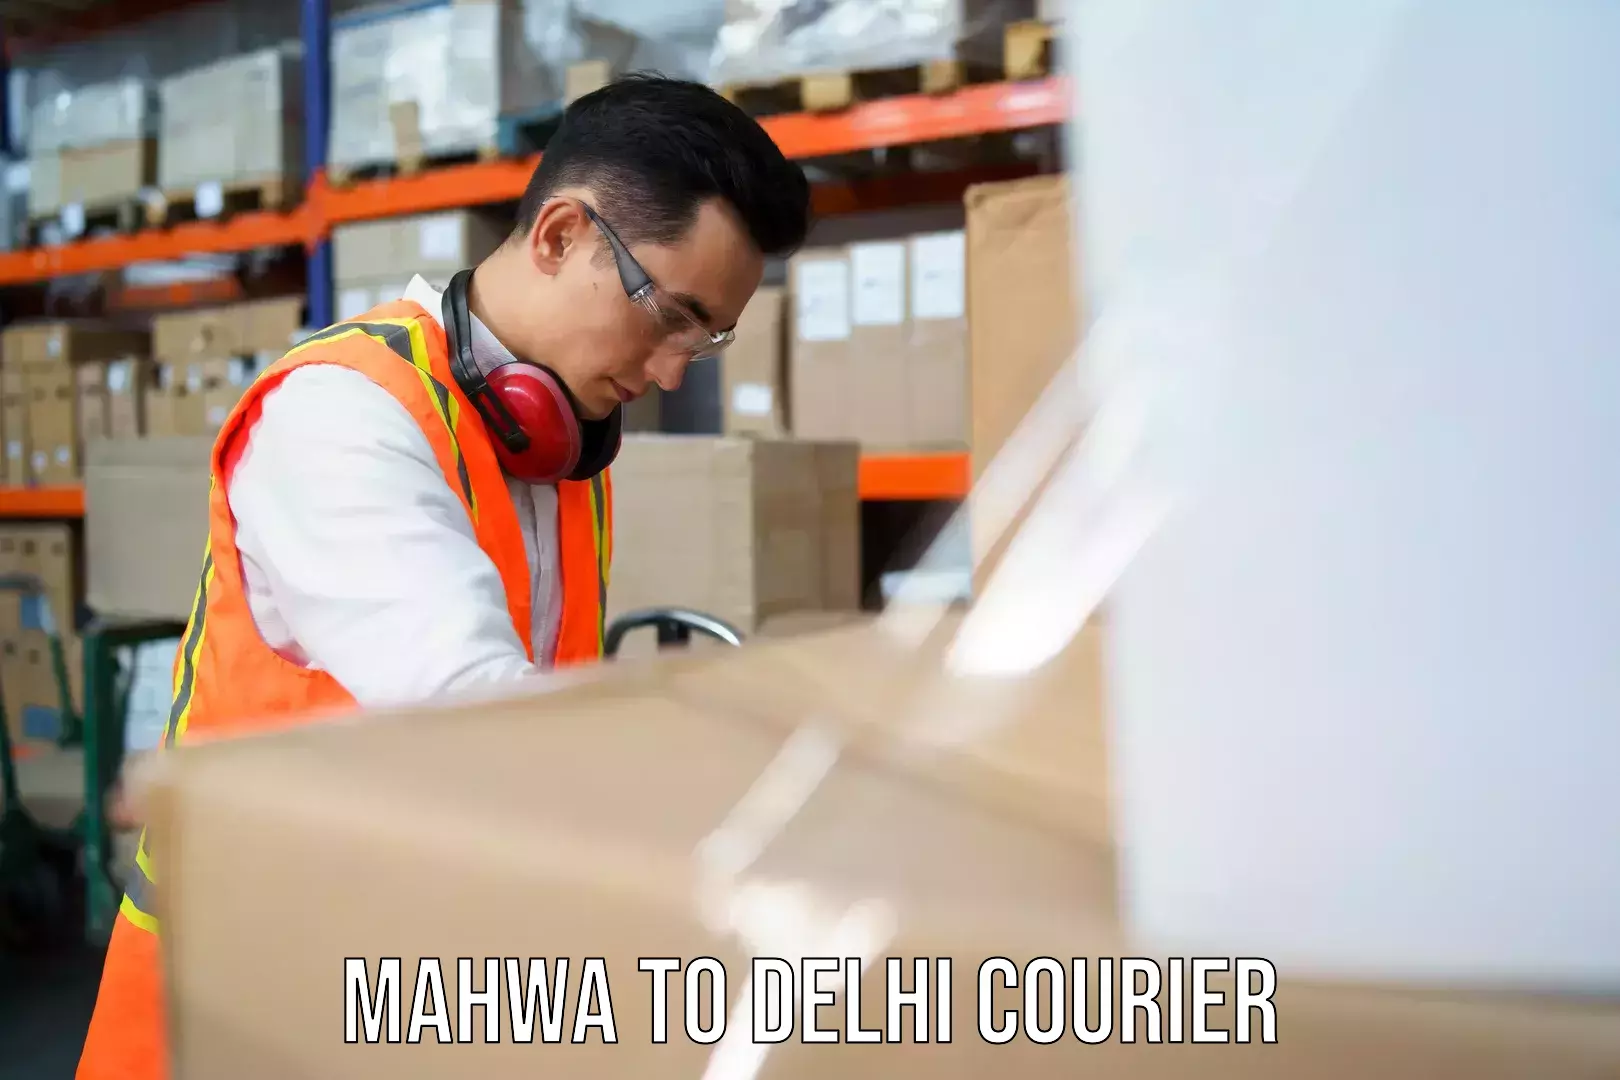 24/7 courier service in Mahwa to University of Delhi